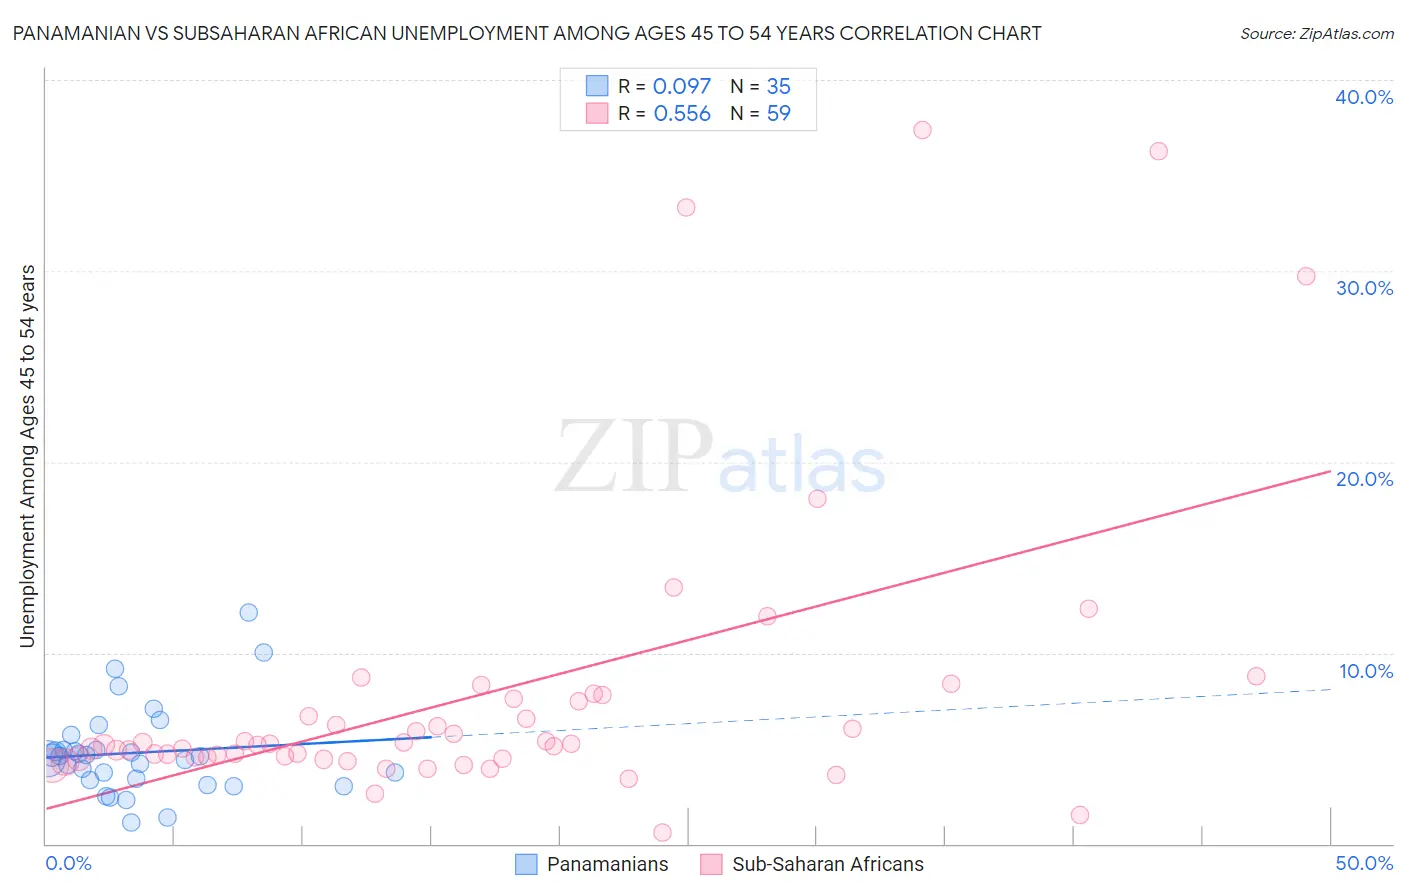 Panamanian vs Subsaharan African Unemployment Among Ages 45 to 54 years